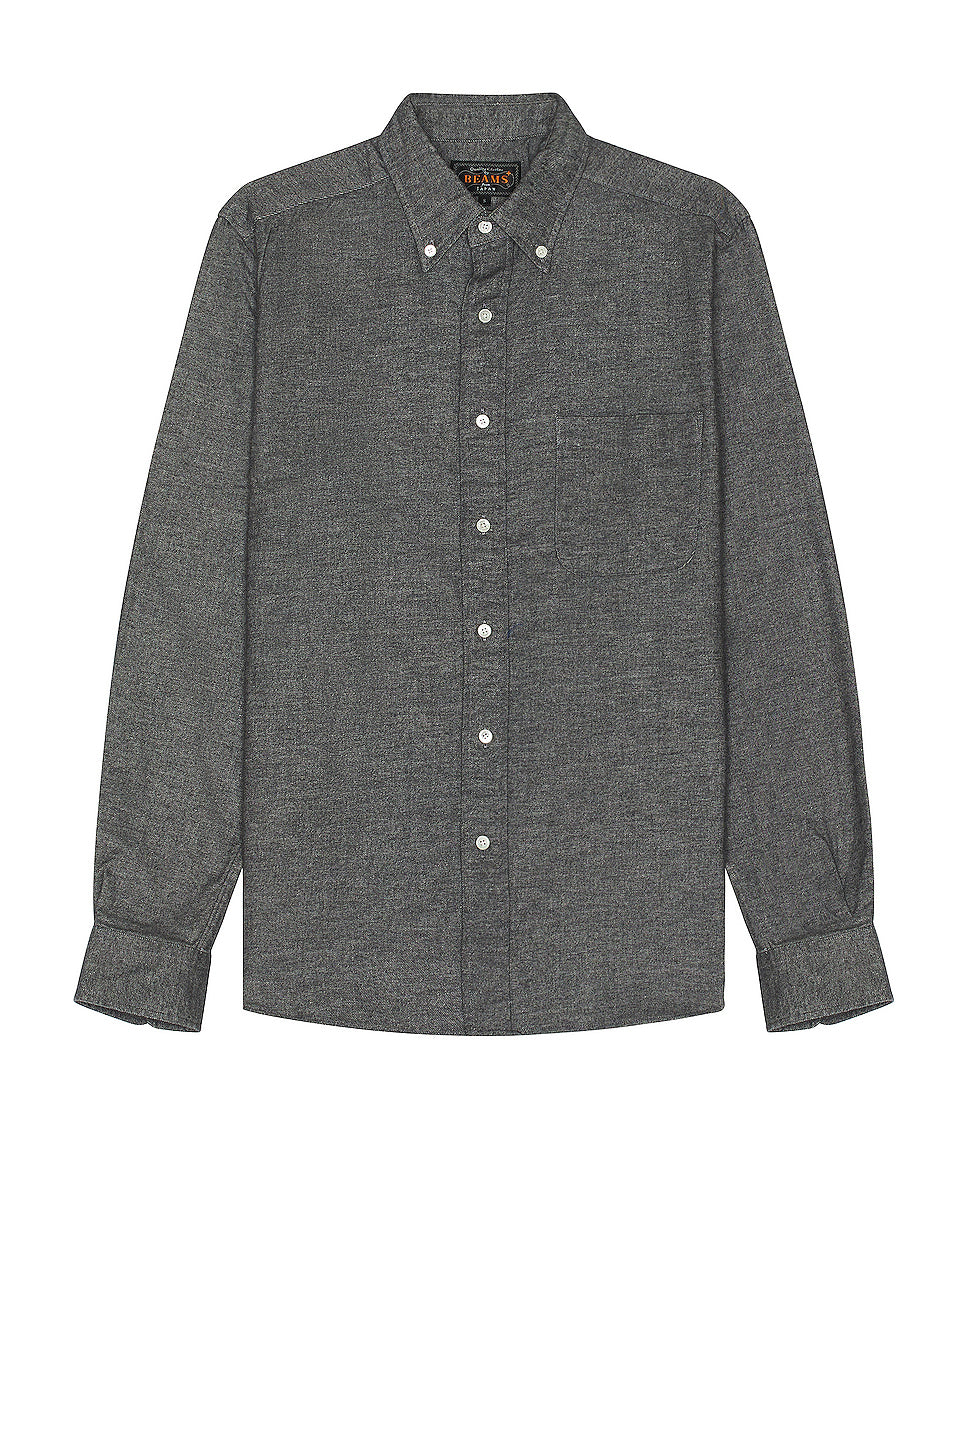 B.d. Flannel Solid Shirt